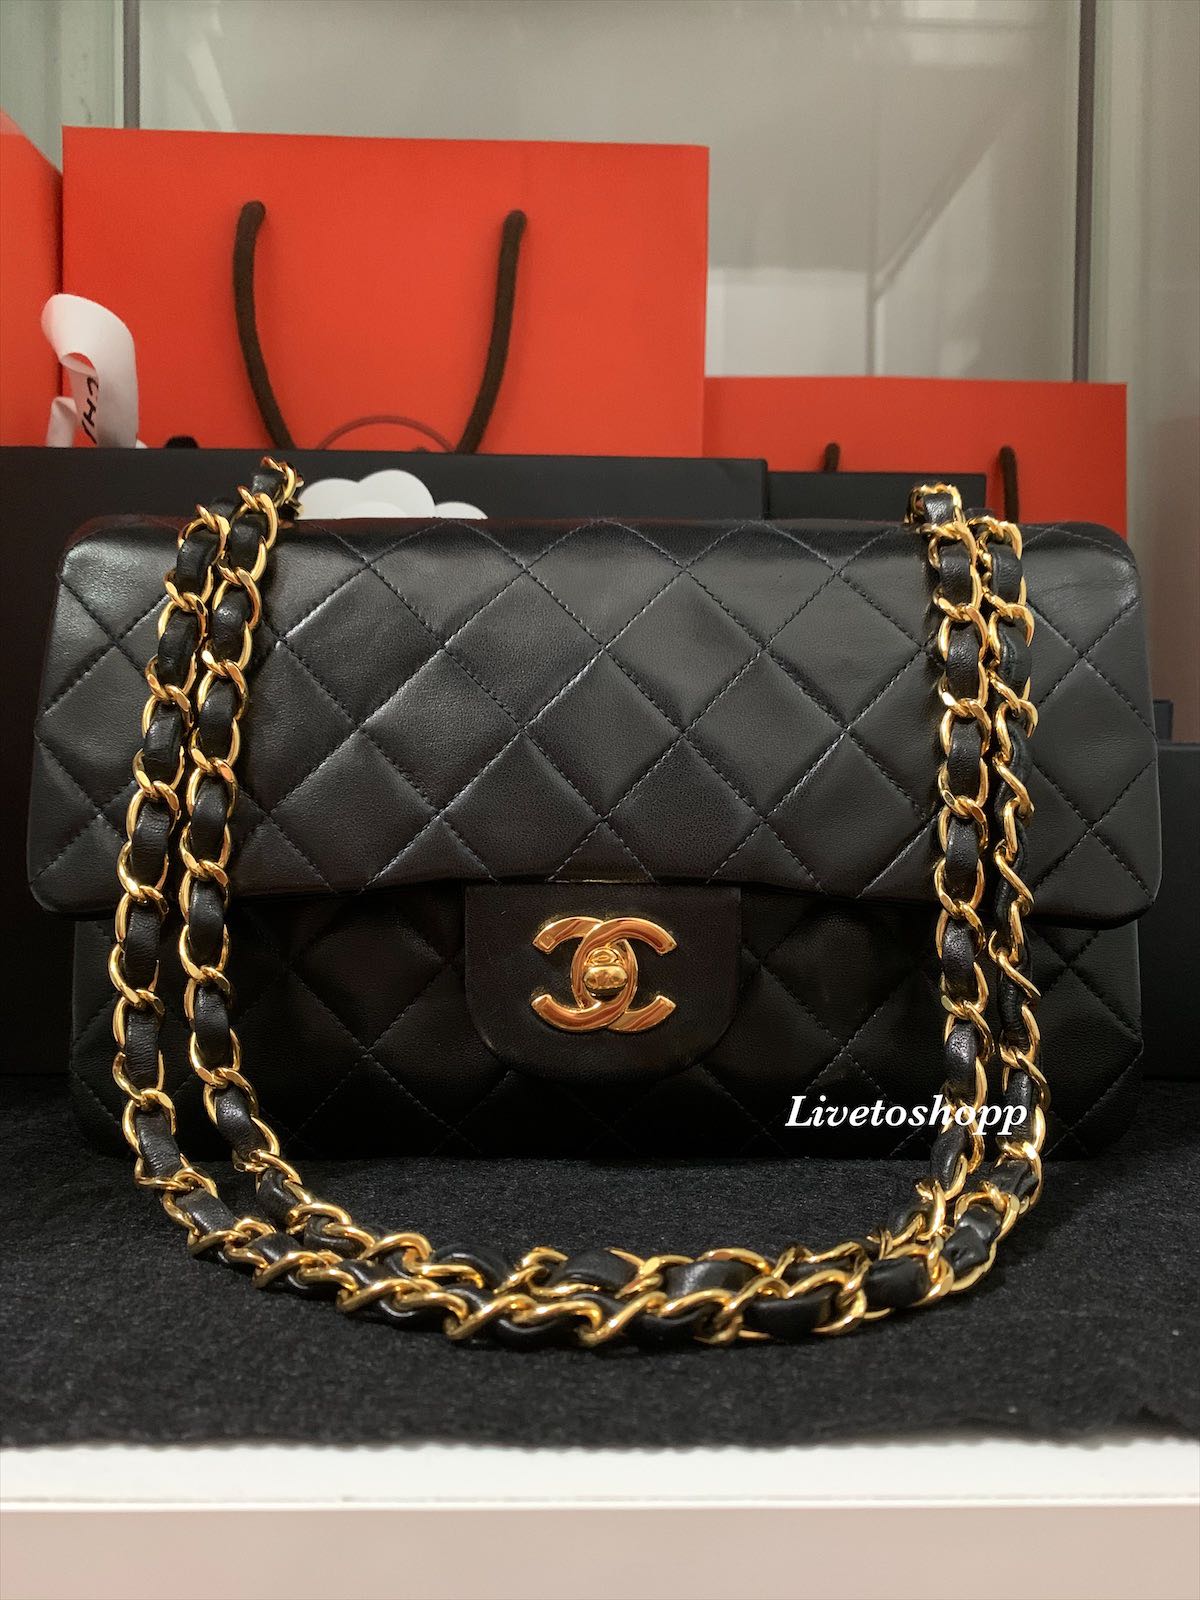 Top 5 tips to authenticate a vintage Chanel flap bag 